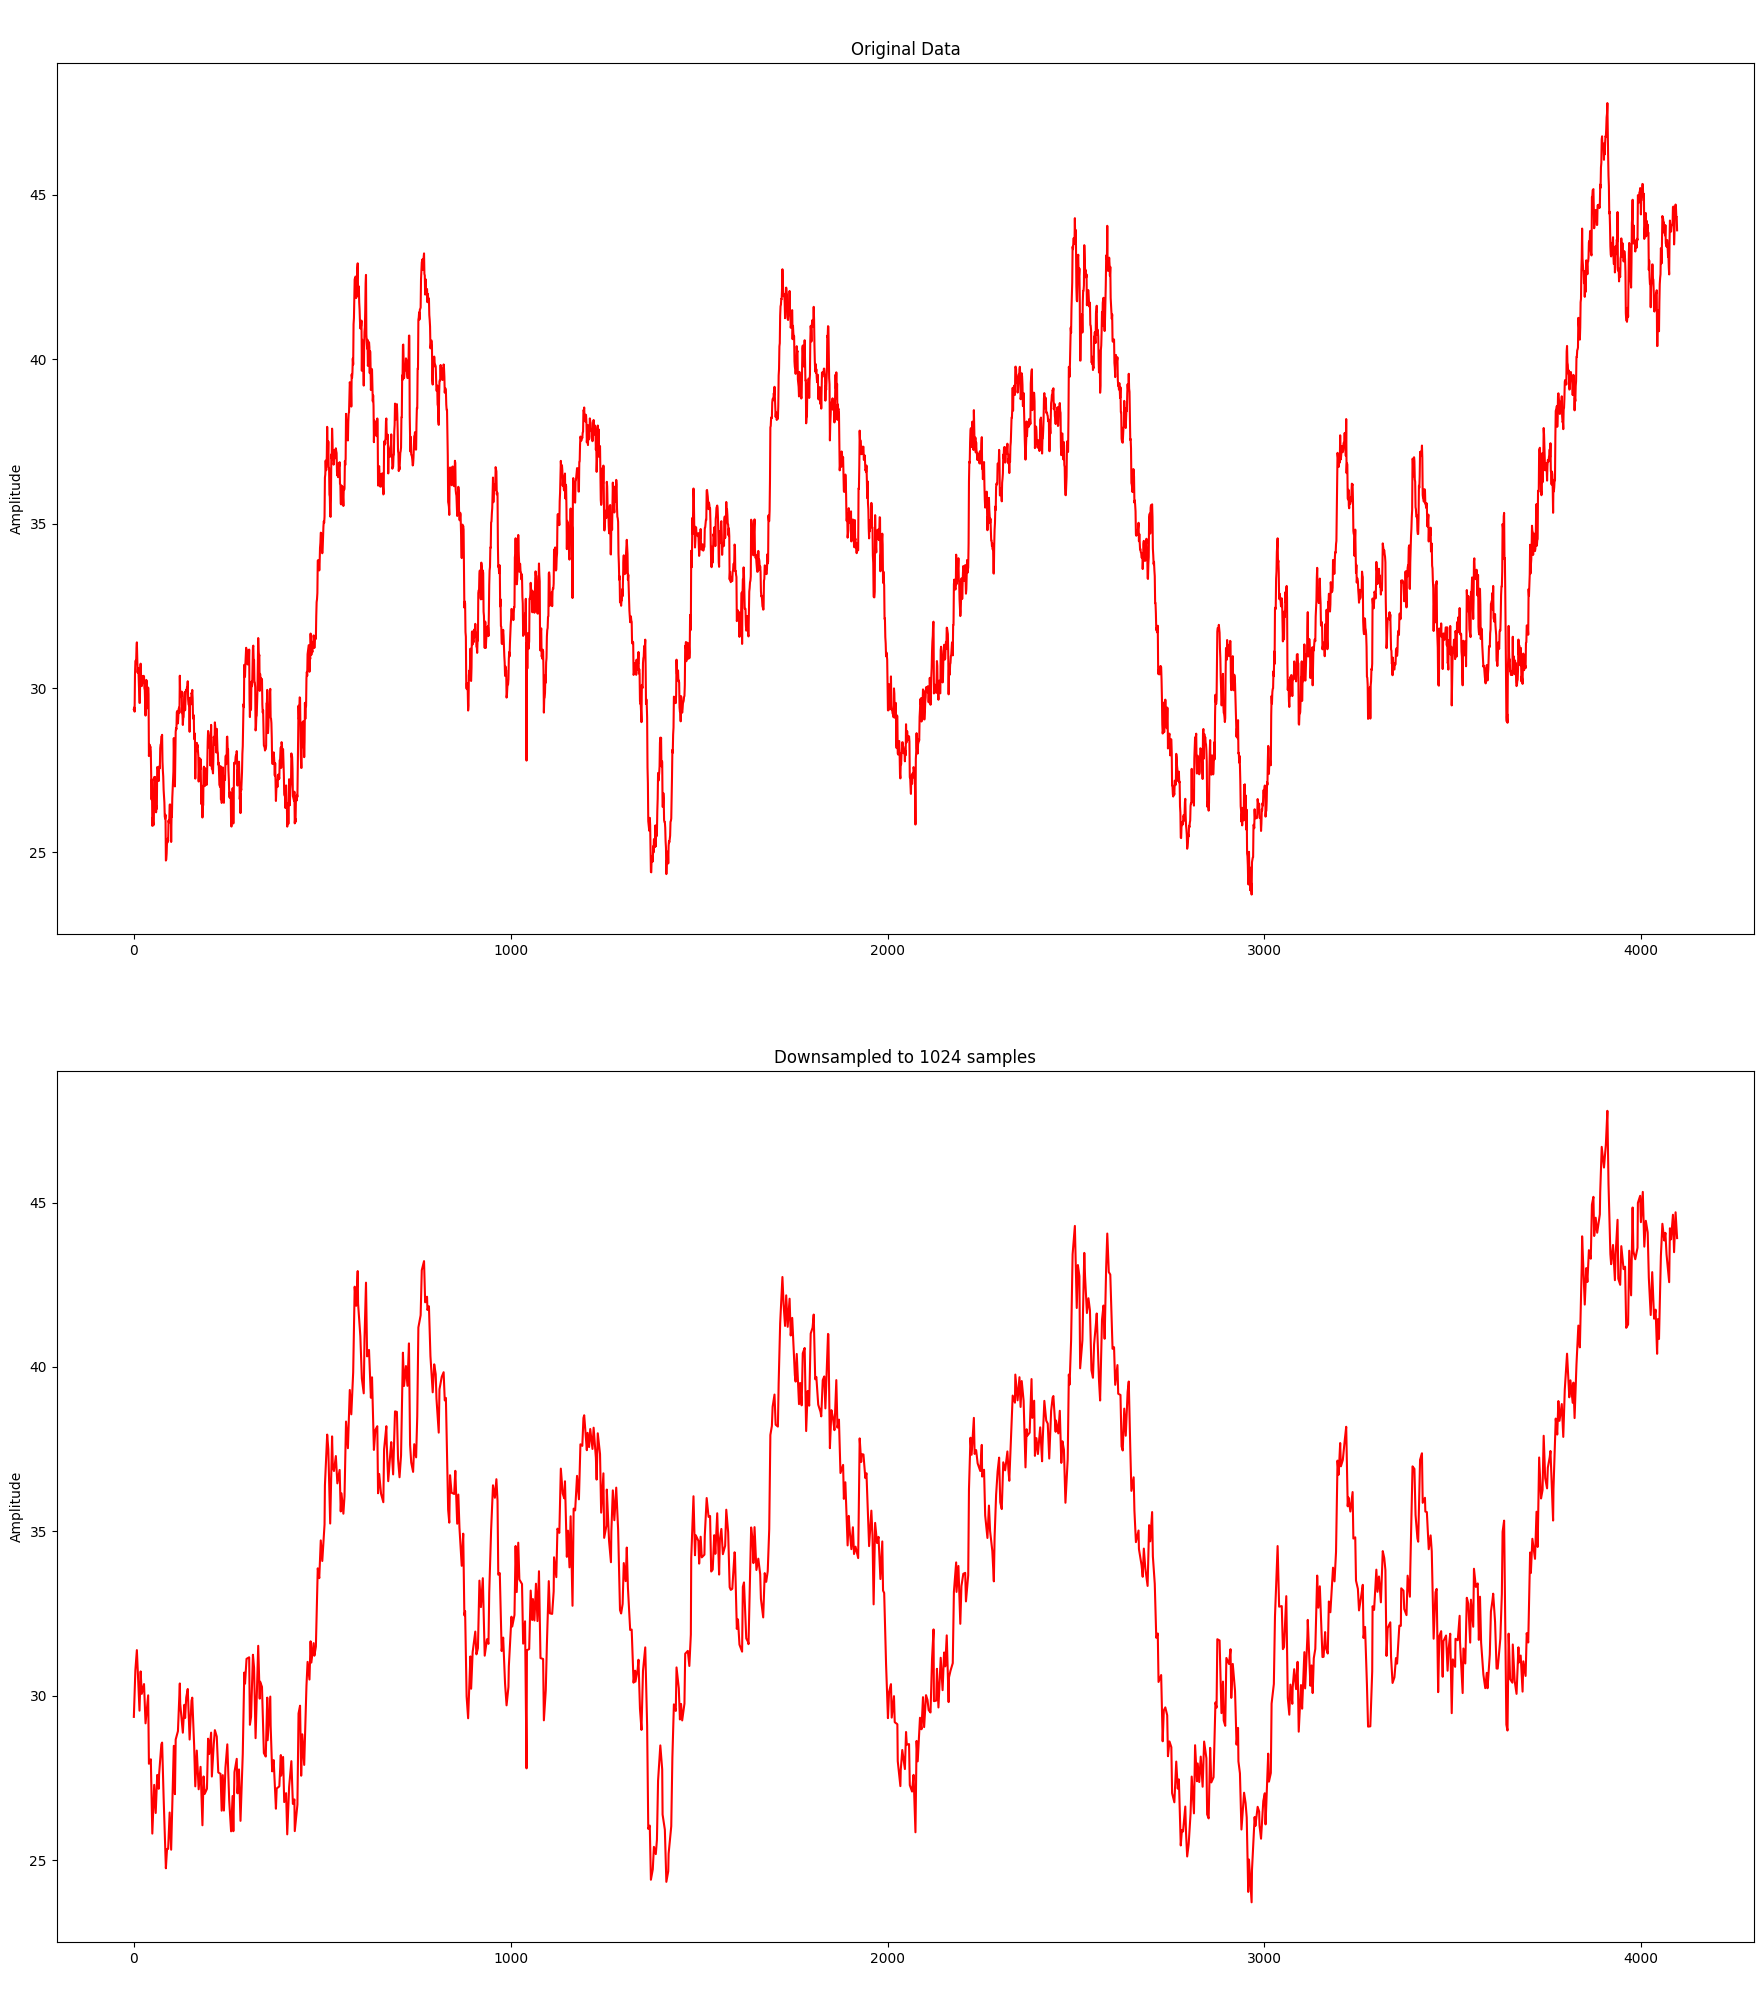 A time series of 4096 samples and a downsampled representation with 1024 samples